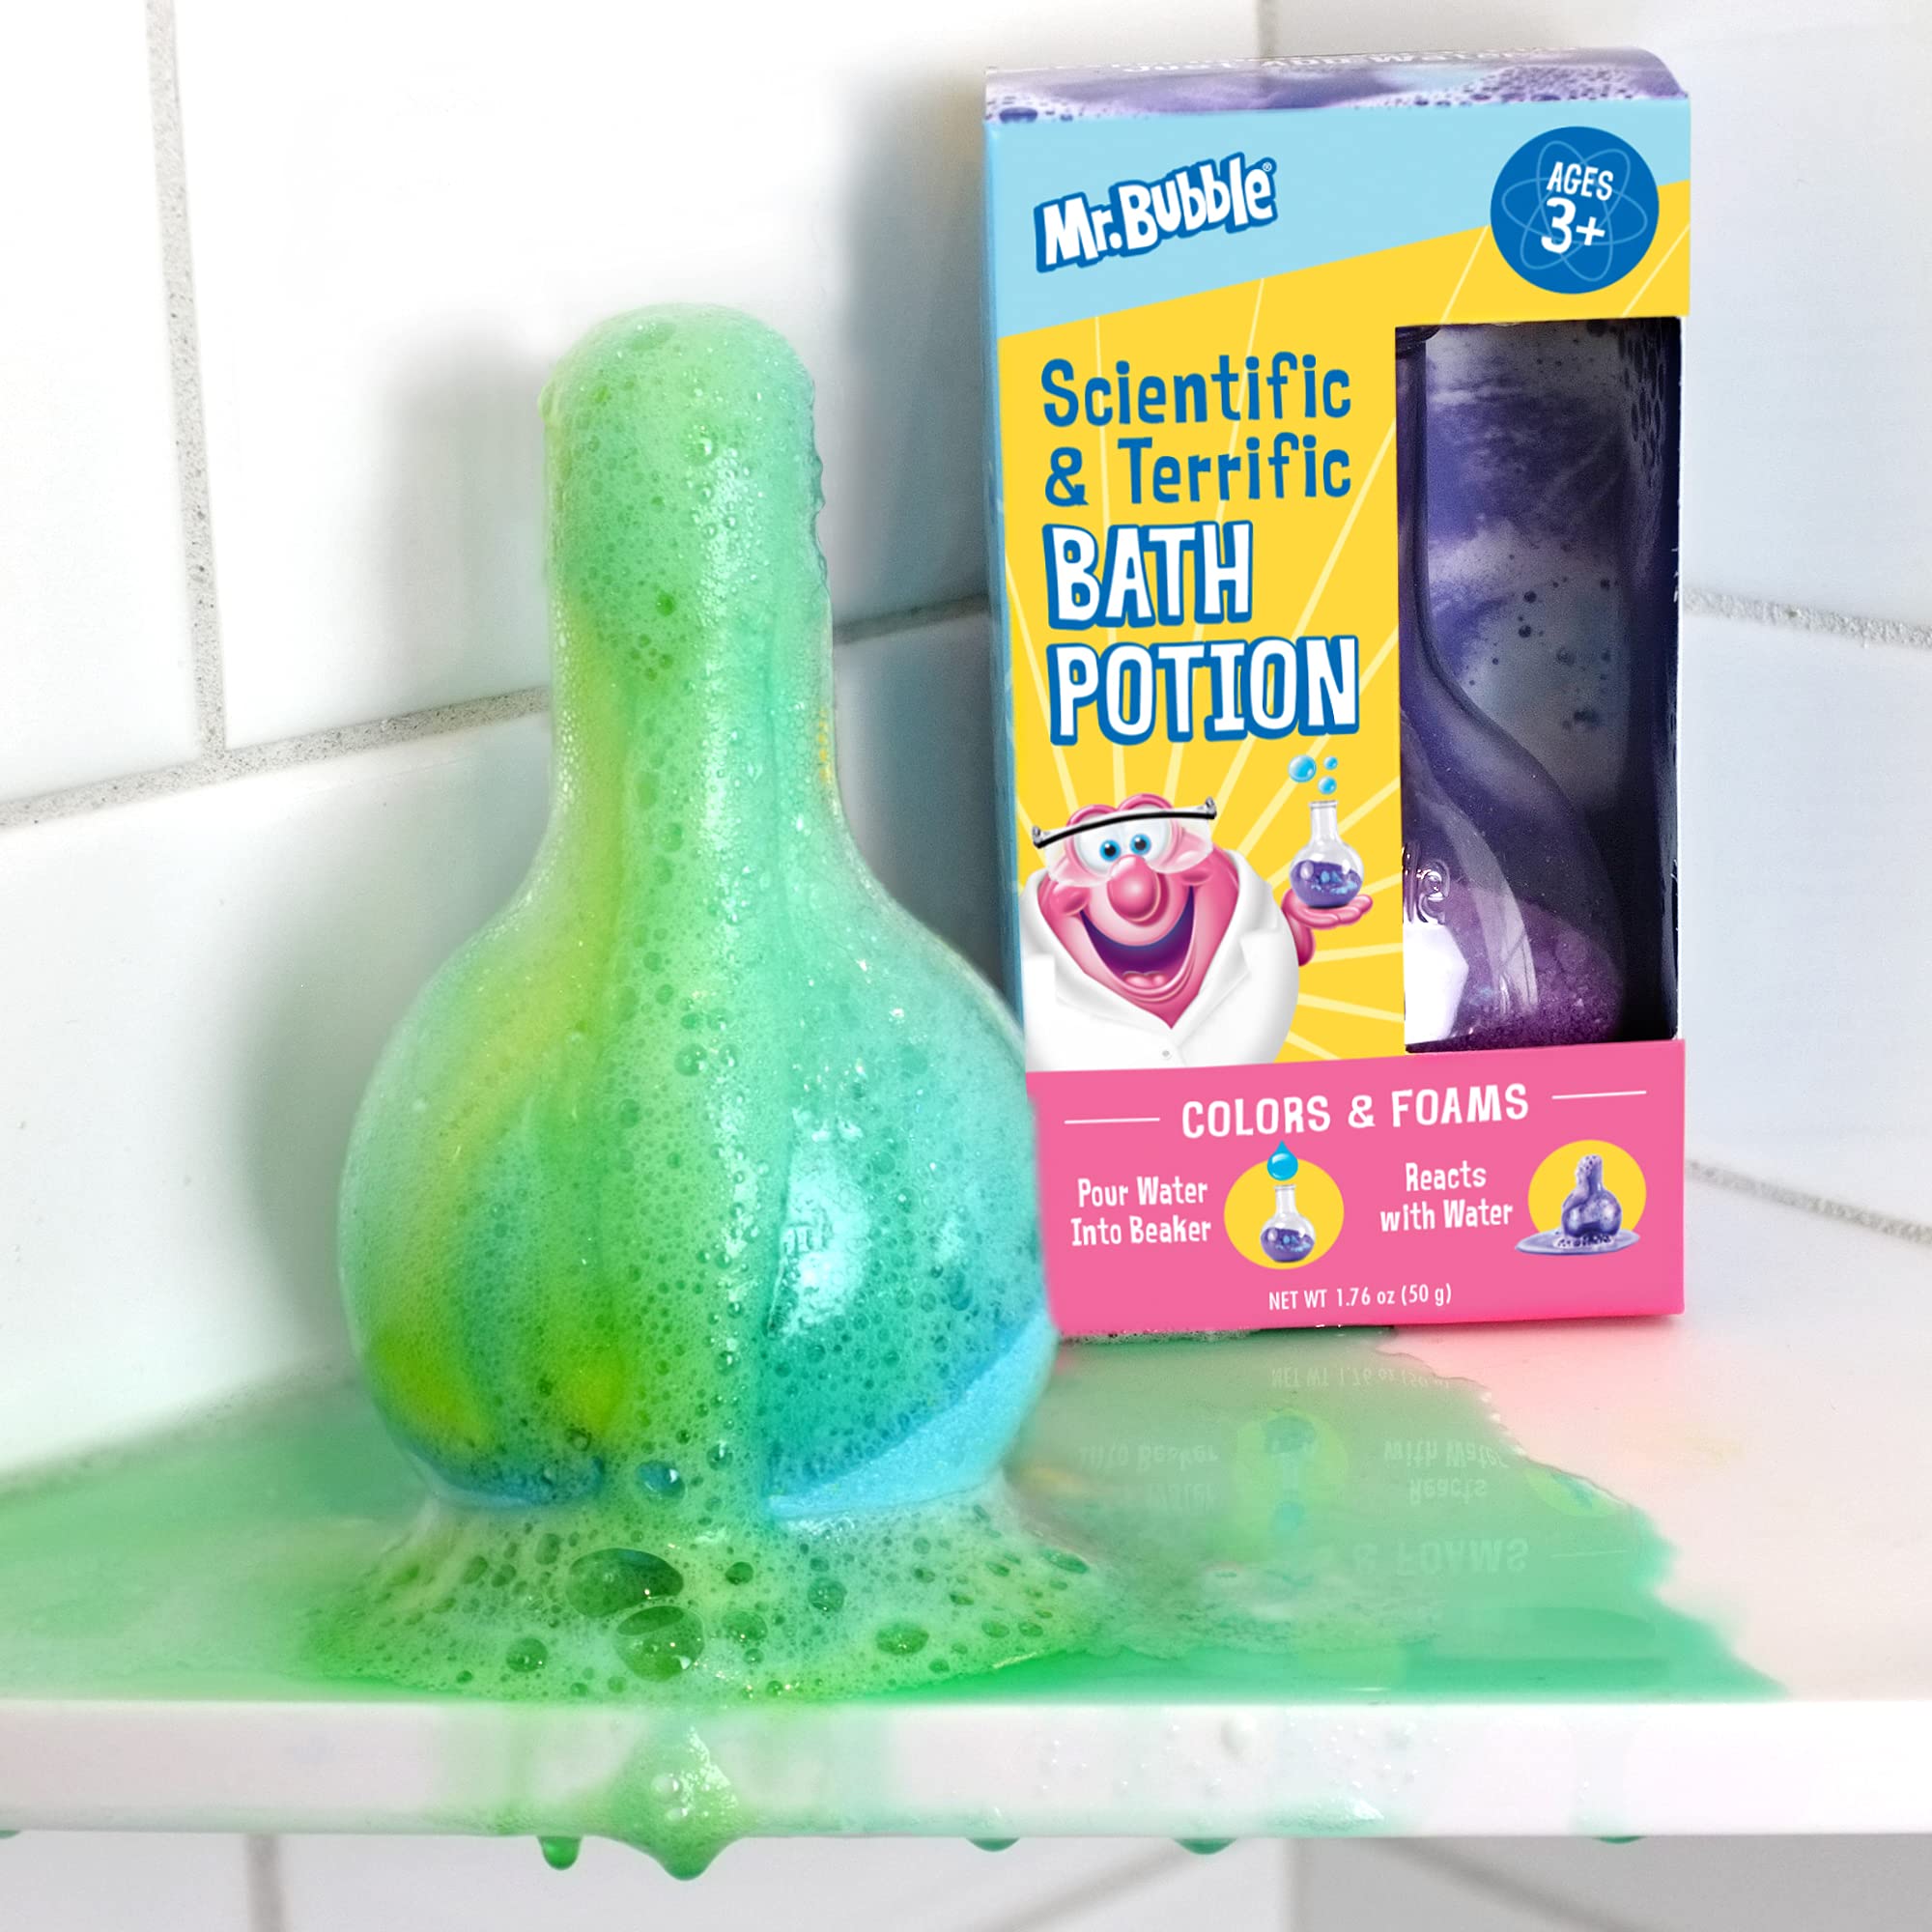 Mr. Bubble Kids Bath Bomb Potions - Colorful Fizzy Fun - Cool Foam and Bubble Science Beaker for The Bath (Pack of 4)